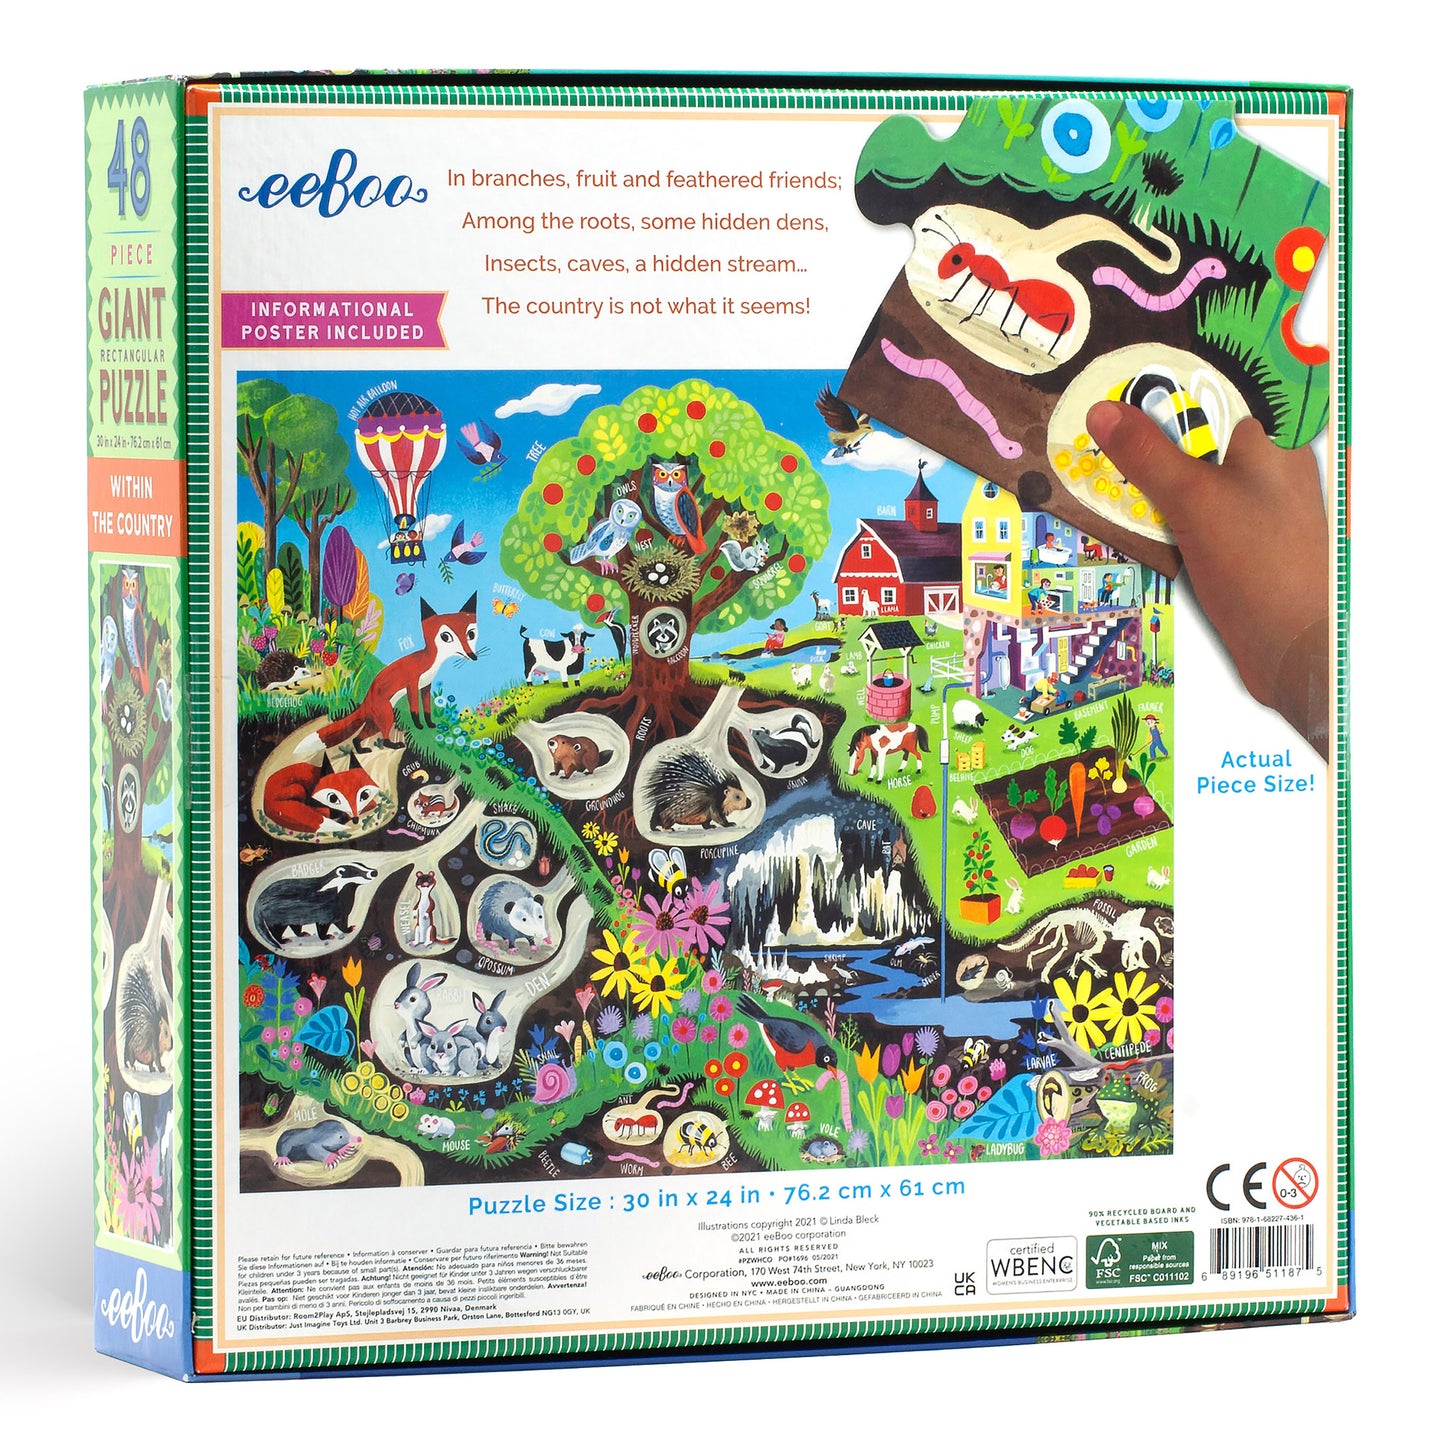 eeBoo Within the Country 48 Piece Giant Floor Puzzle for Kids Ages 4+